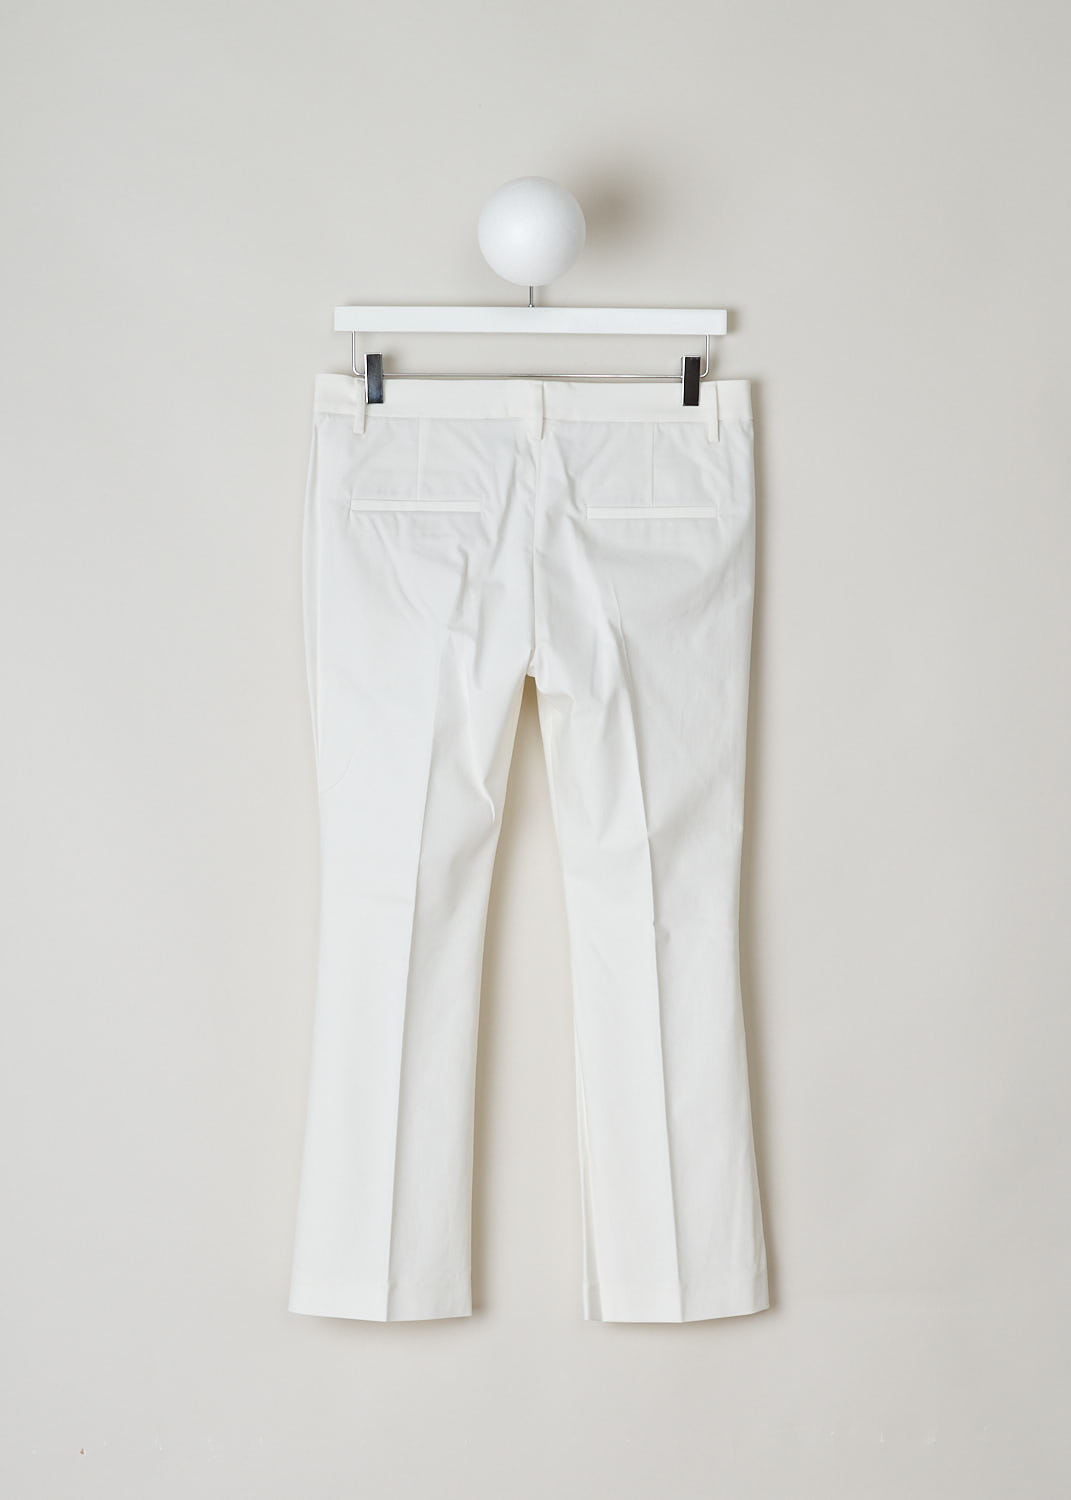 Brunello Cucinelli, Off-white boot-cut chino, M0F70P1951_7025, white, back, Made in the flat front model, with boot-cut legs. Furthermore, this model has two forward slanted pockets on the front and two jetted pockets on the back.